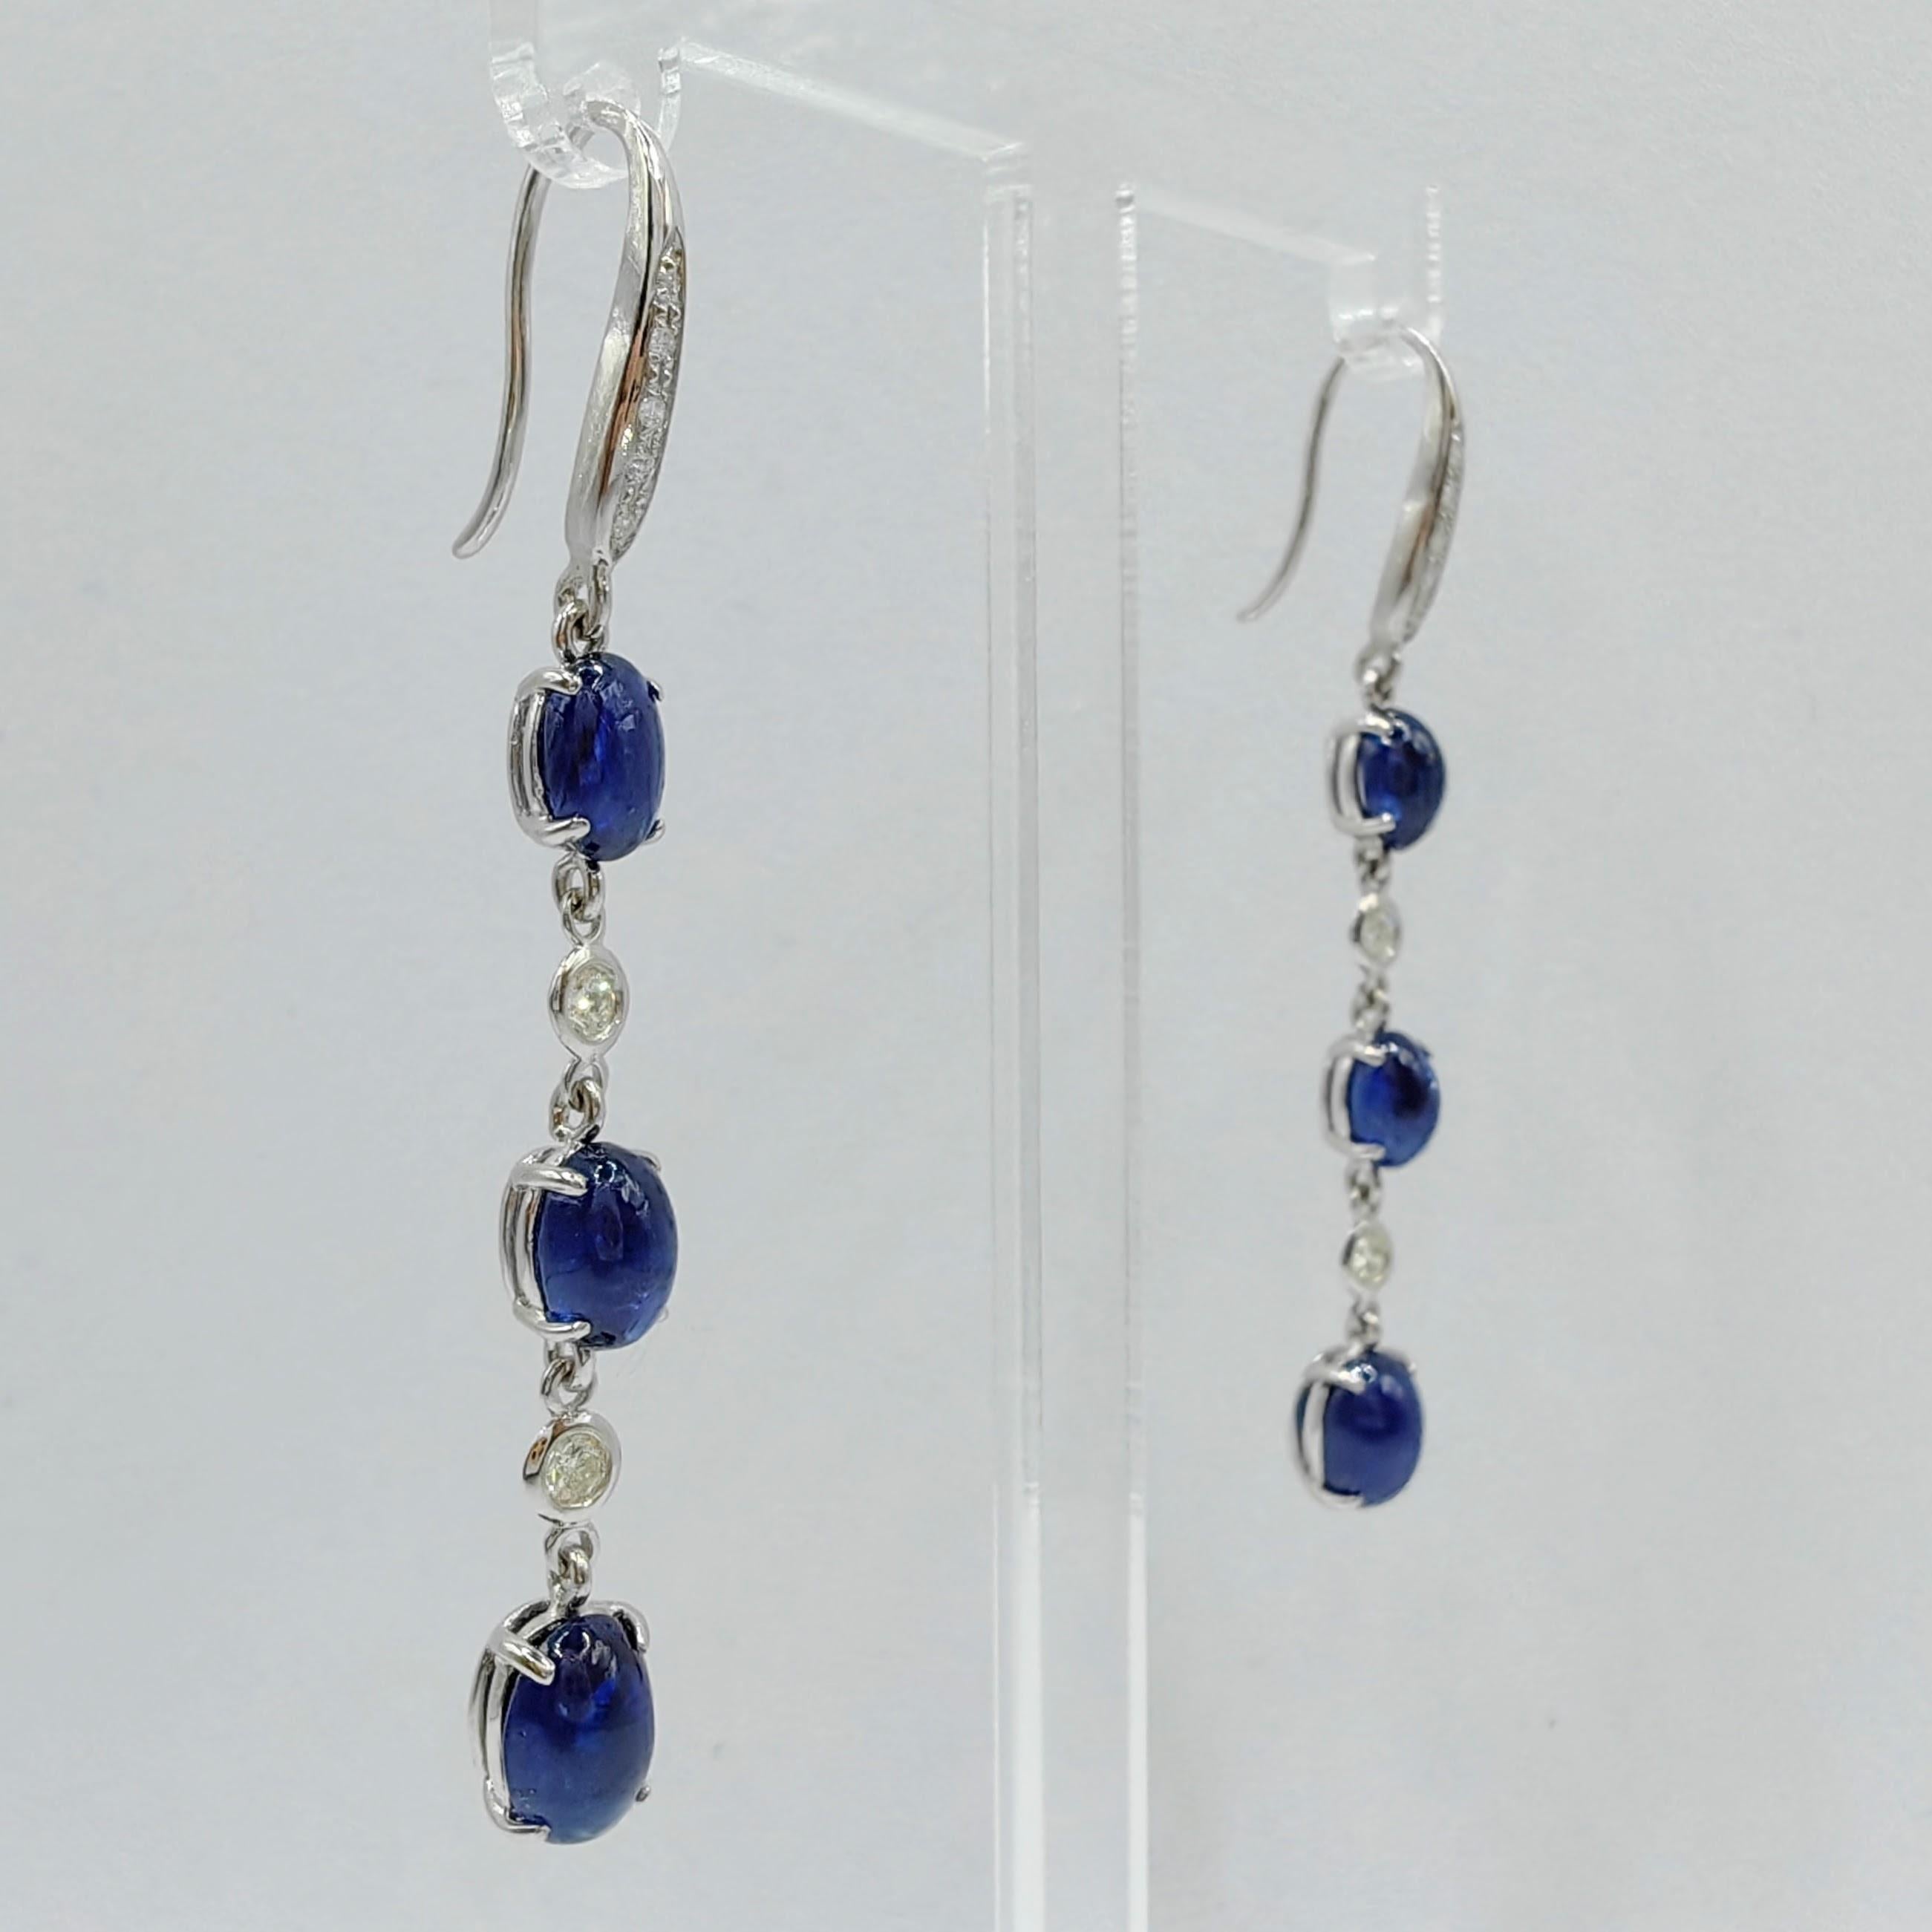 Contemporary 5.22ct Royal Blue Cabochon Sapphire Diamond Dangling Earrings in 18K White Gold For Sale